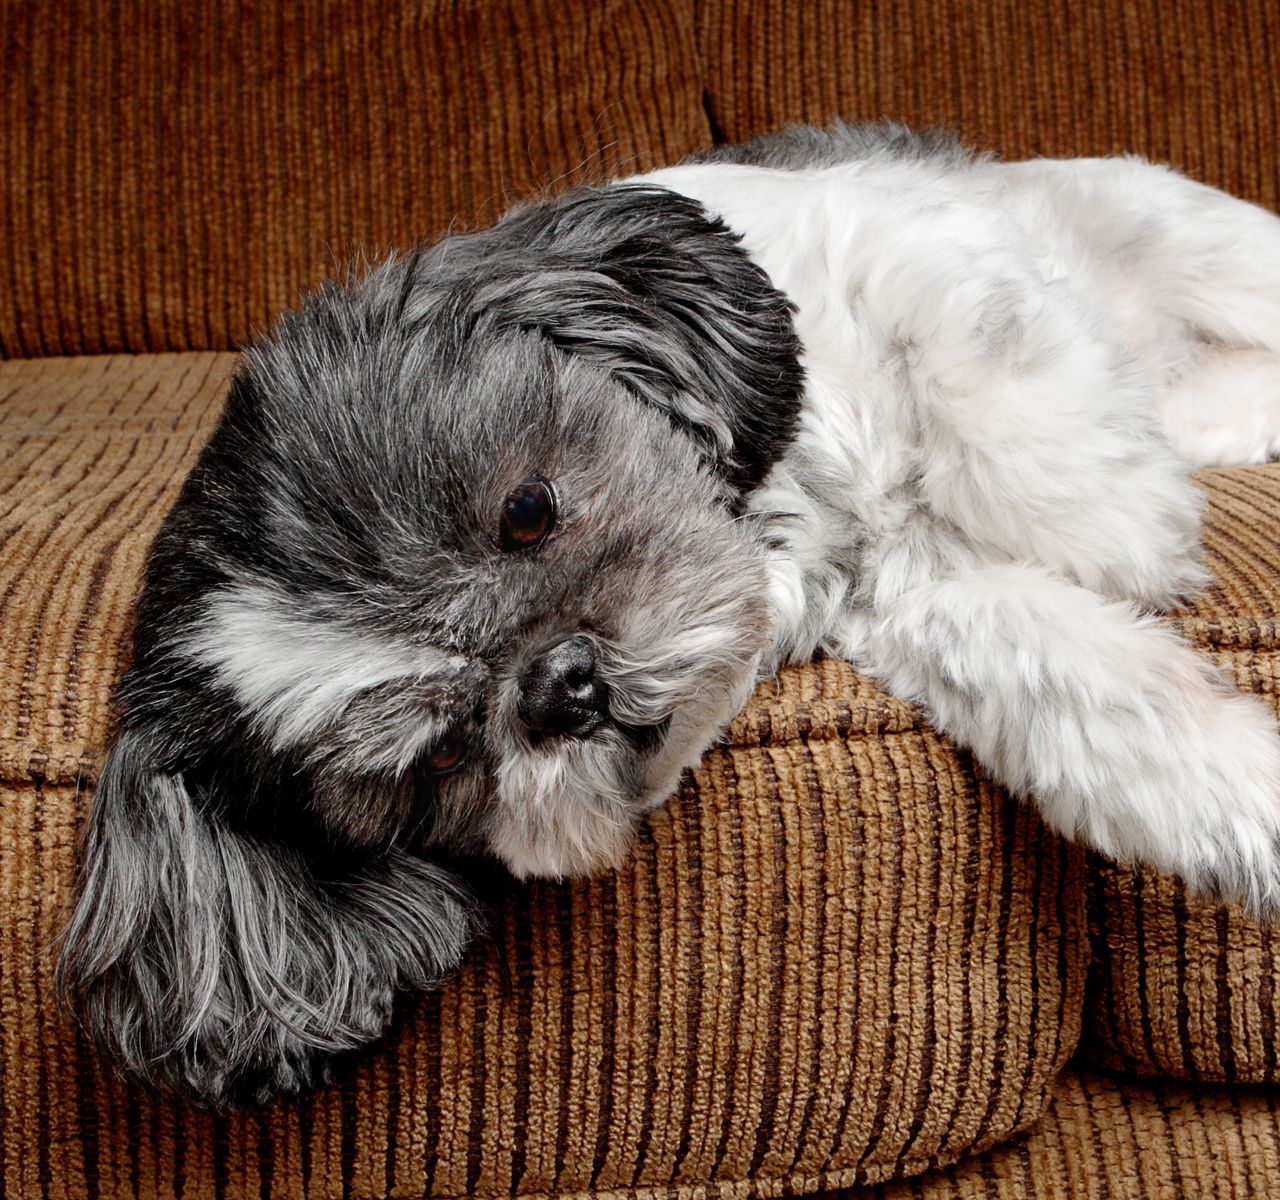 How to Help Your Dog’s Upset Stomach